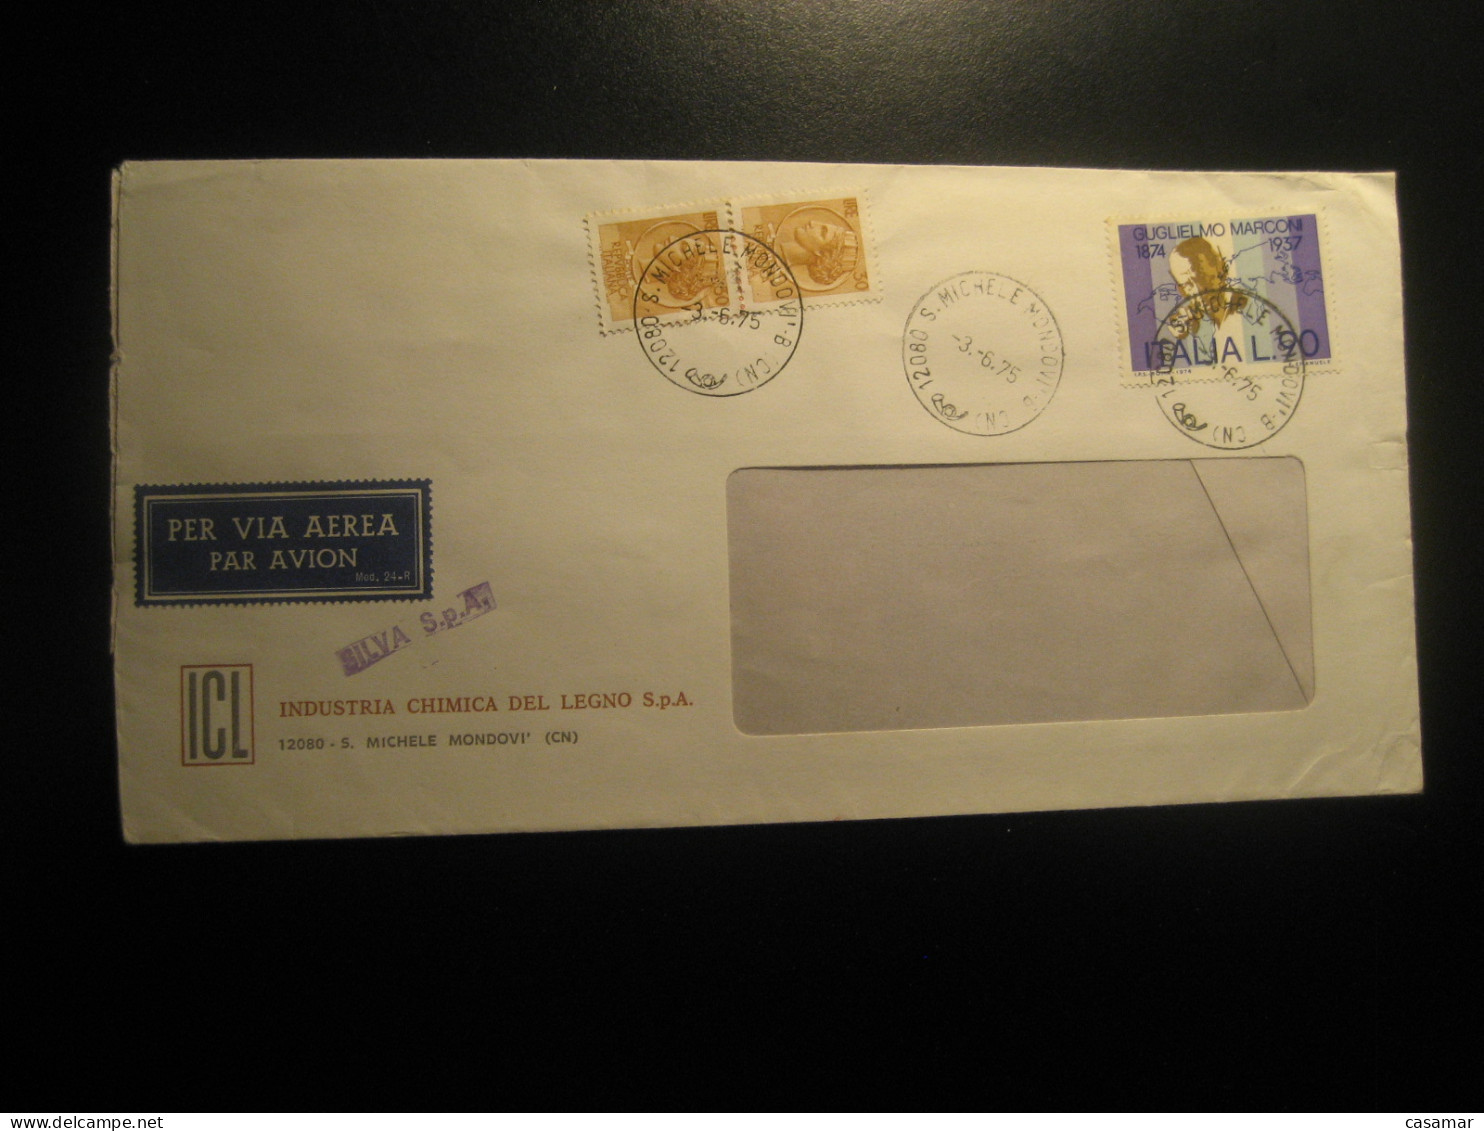 S. MICHELE MONDOVI 1975 Industria Quimica Del Legno Leather Cuir Chemical Chemistry Air Mail Cancel Cover ITALY - Chimie